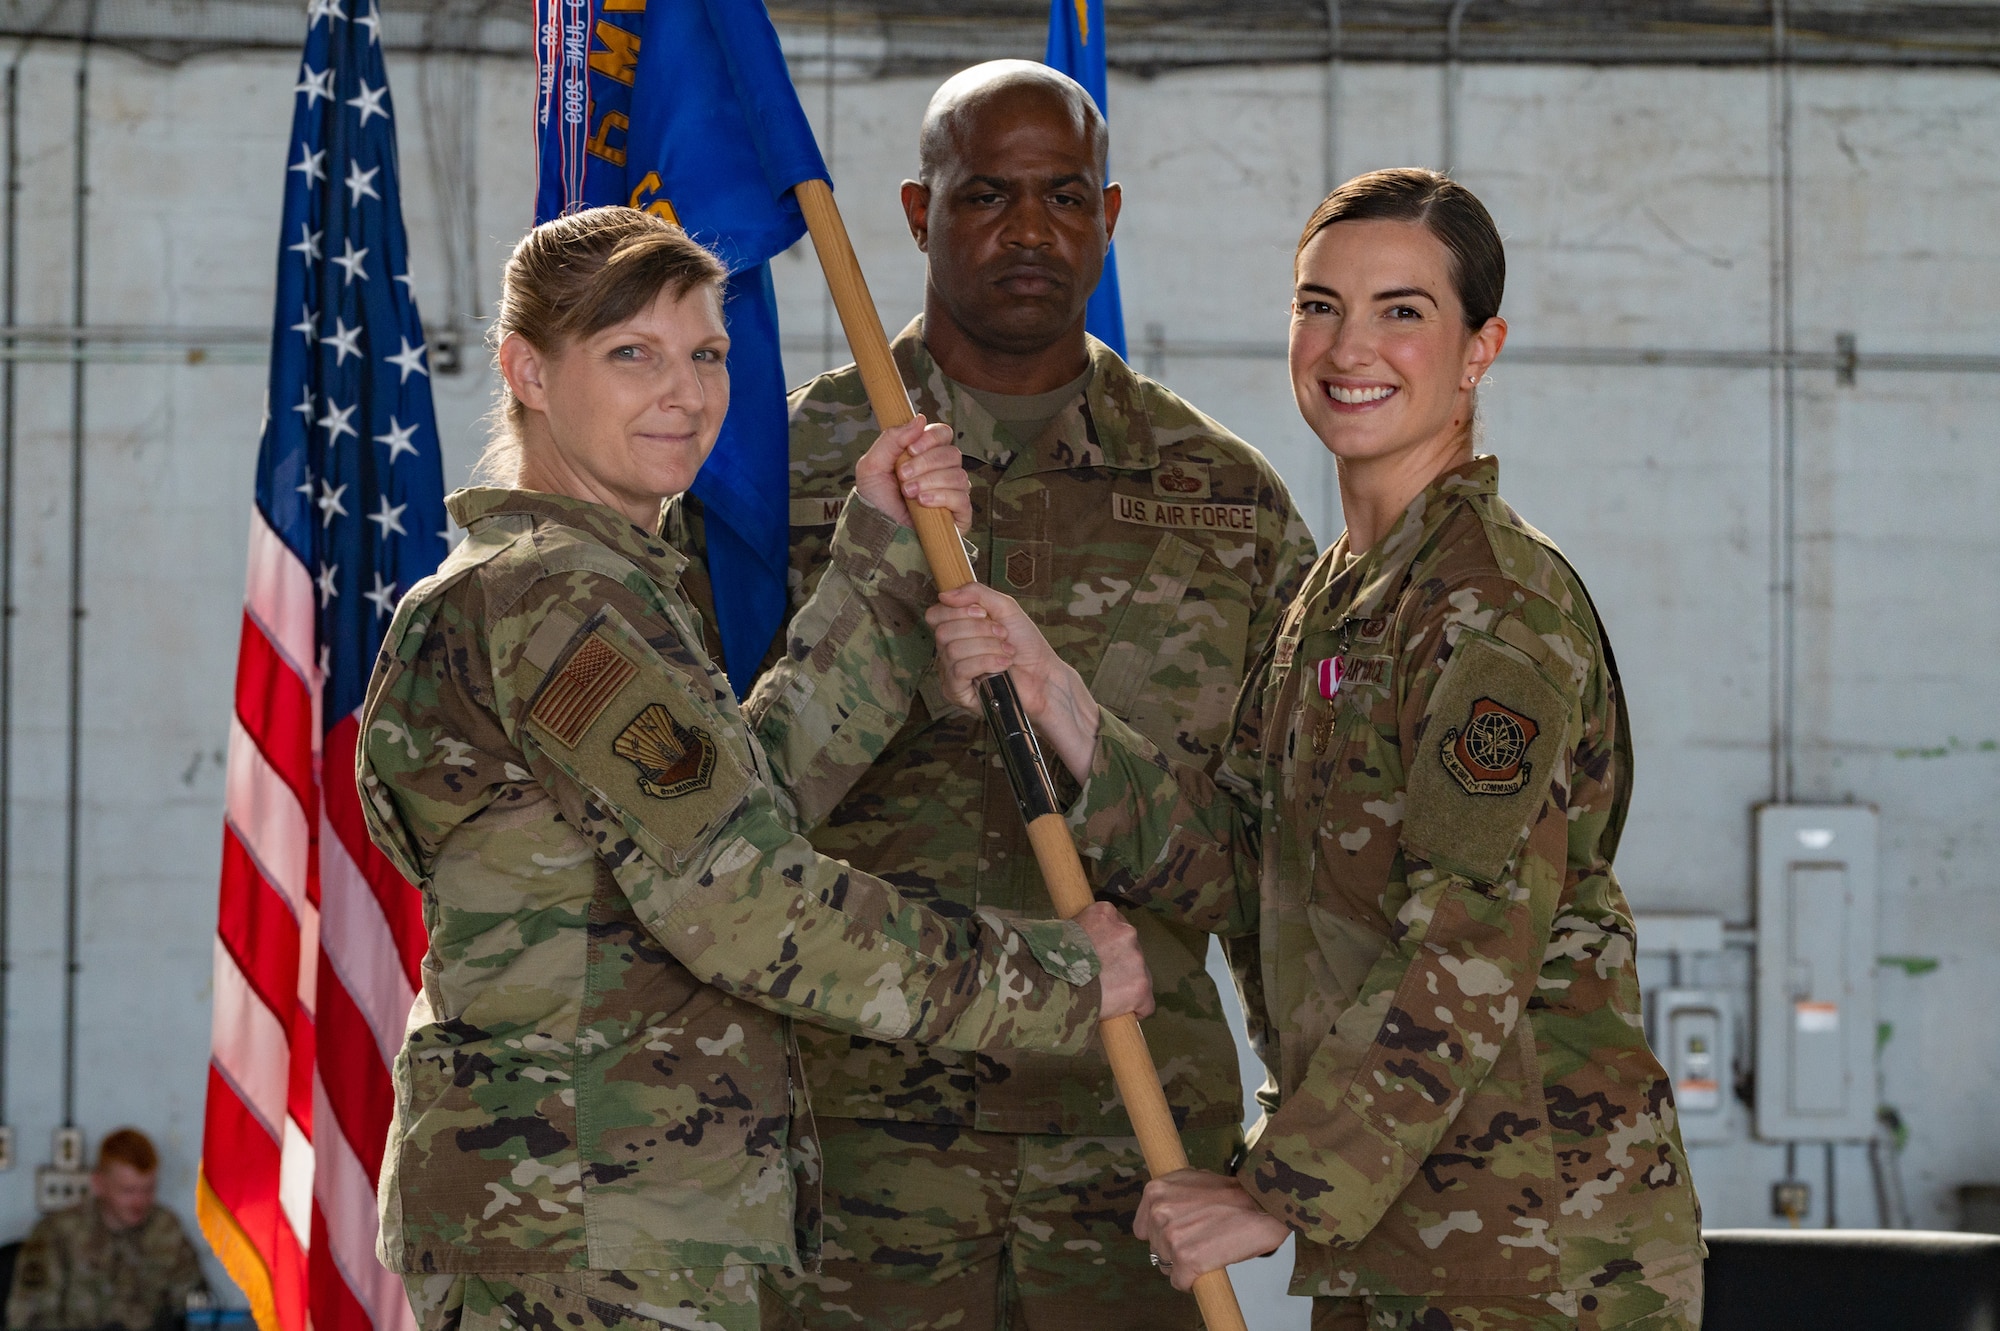 U.S. Air Force Col. Charity Banks, 6th Maintenance Group commander, transfers the flag from U.S. Air Force Lt. Col. Jennifer Lindberg, 6th Aircraft Maintenance Squadron outgoing commander, during the change of command ceremony at MacDill Air Force Base, Florida, June 5, 2023.